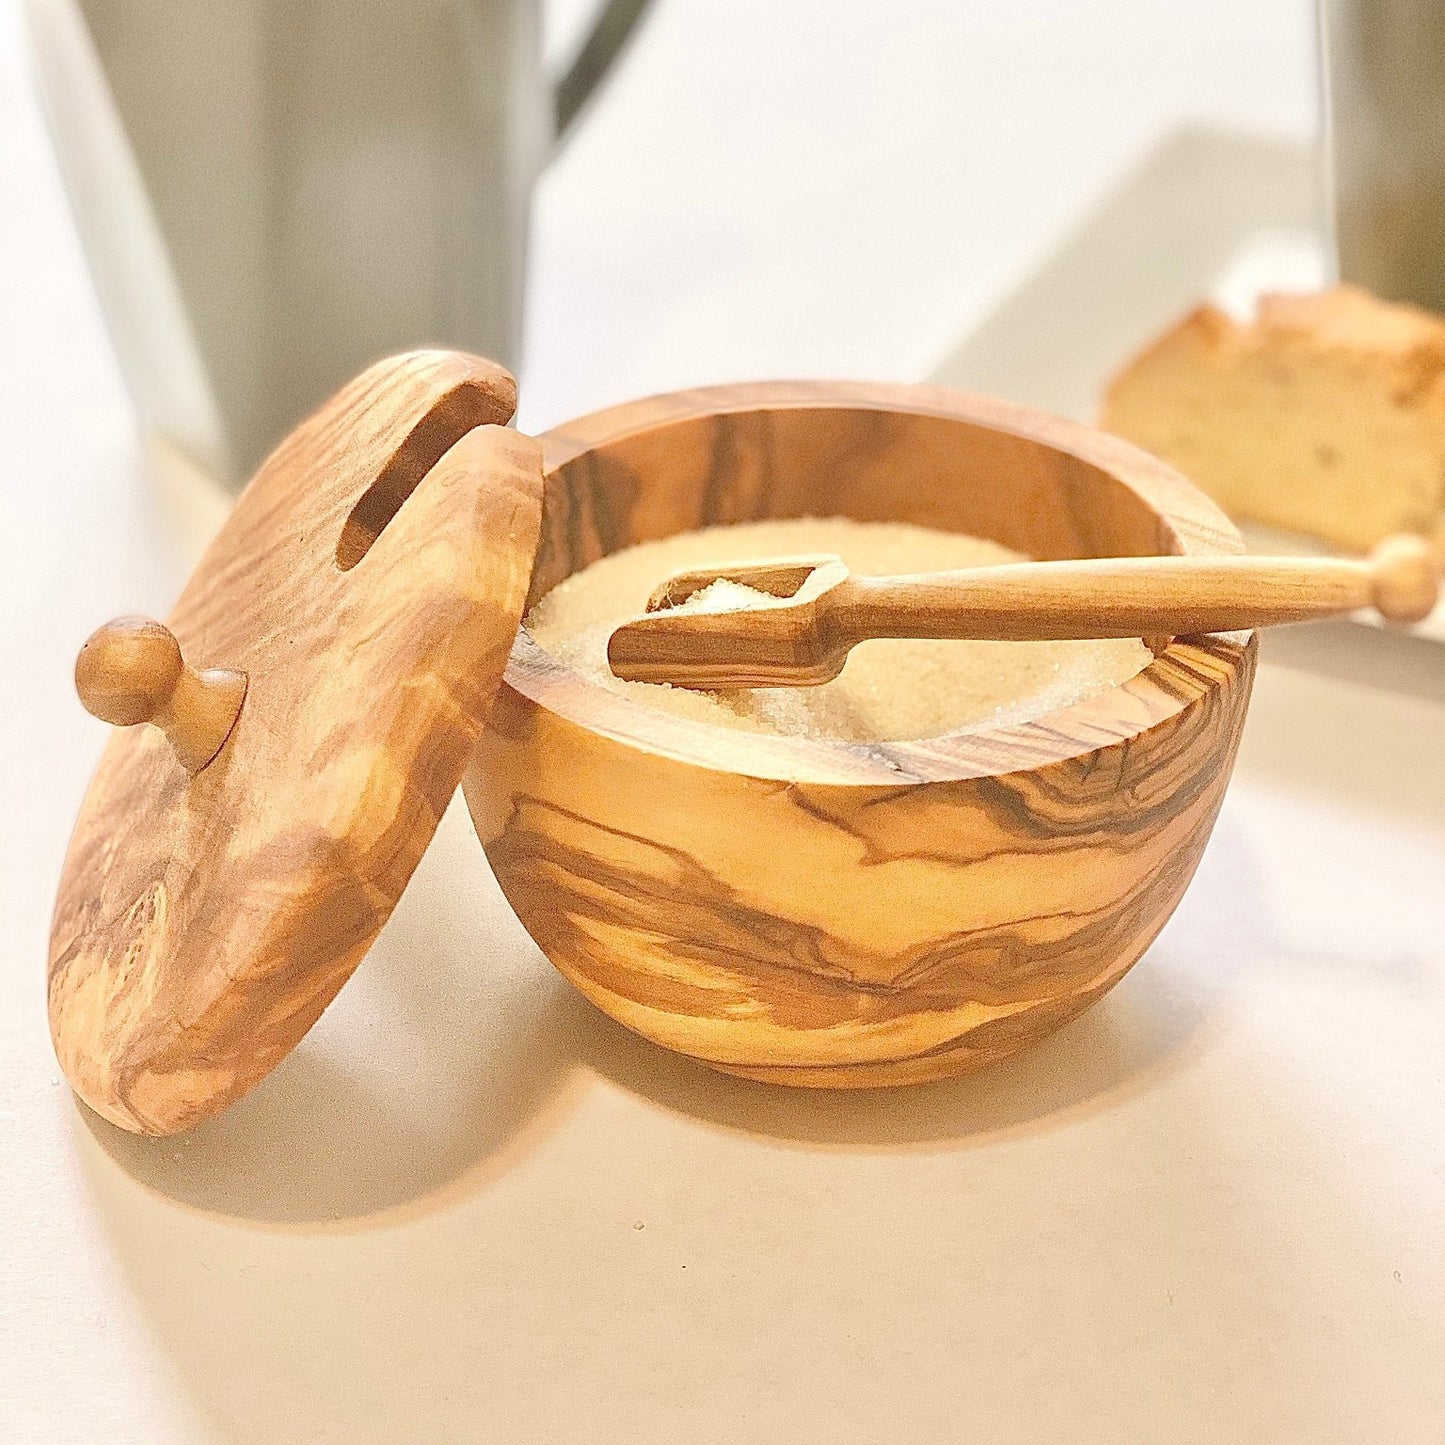 [RESERVED FOR BRITTANY] Olivewood Sugar Bowl with Spoon - Natural Olivewood -Freehand Market